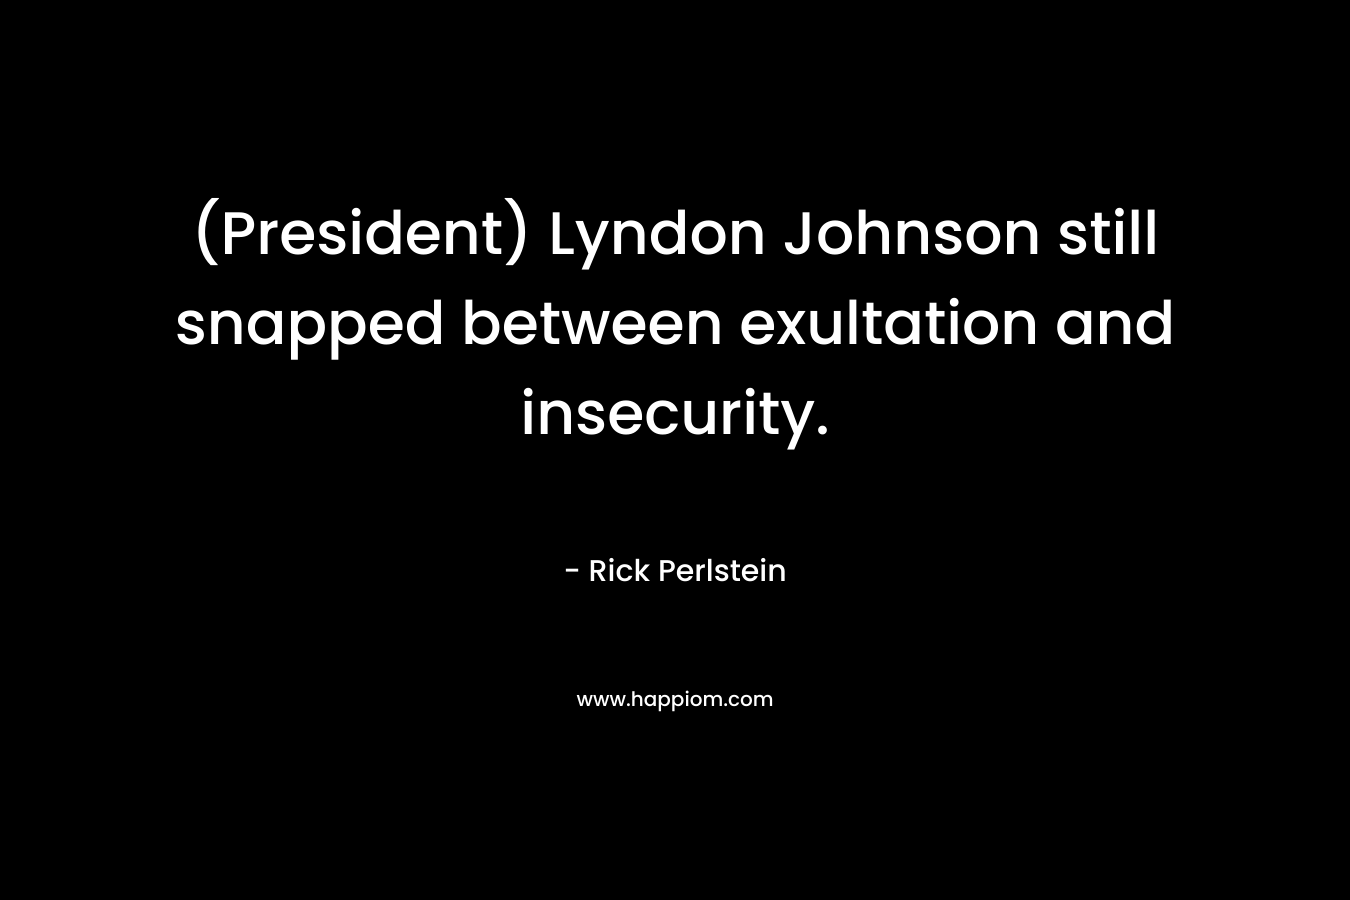 (President) Lyndon Johnson still snapped between exultation and insecurity.